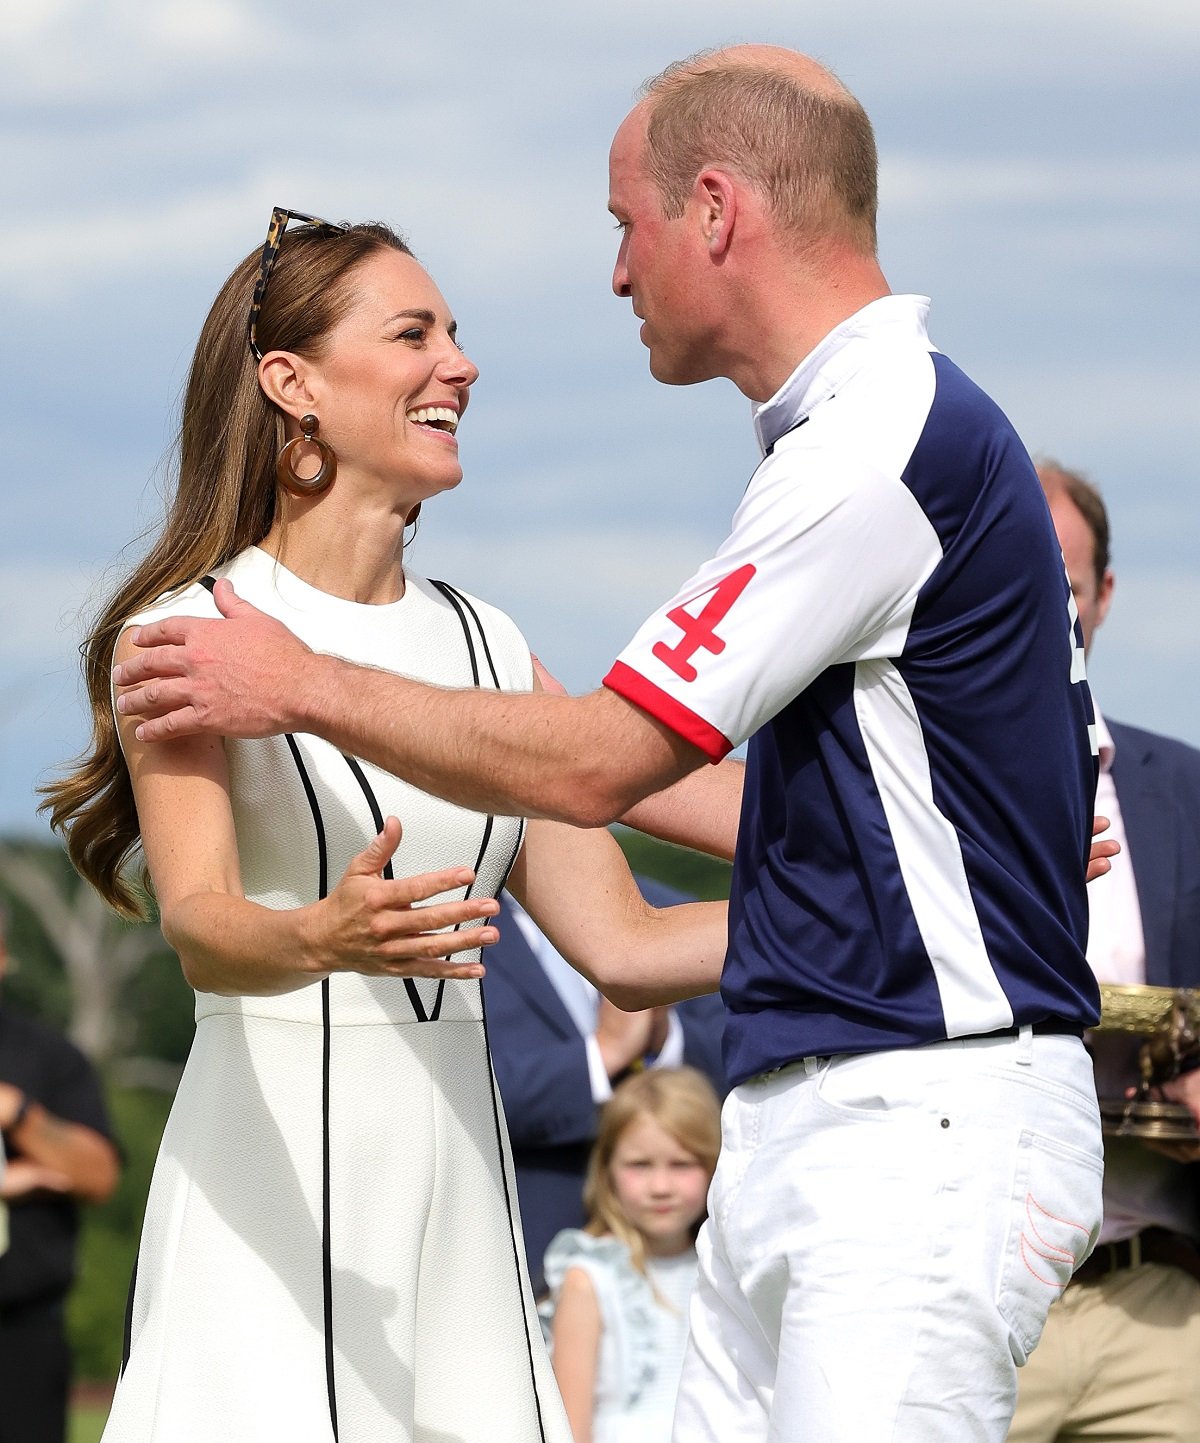 Kate Middleton and Prince William about to embrace after the Royal Charity Polo Cup